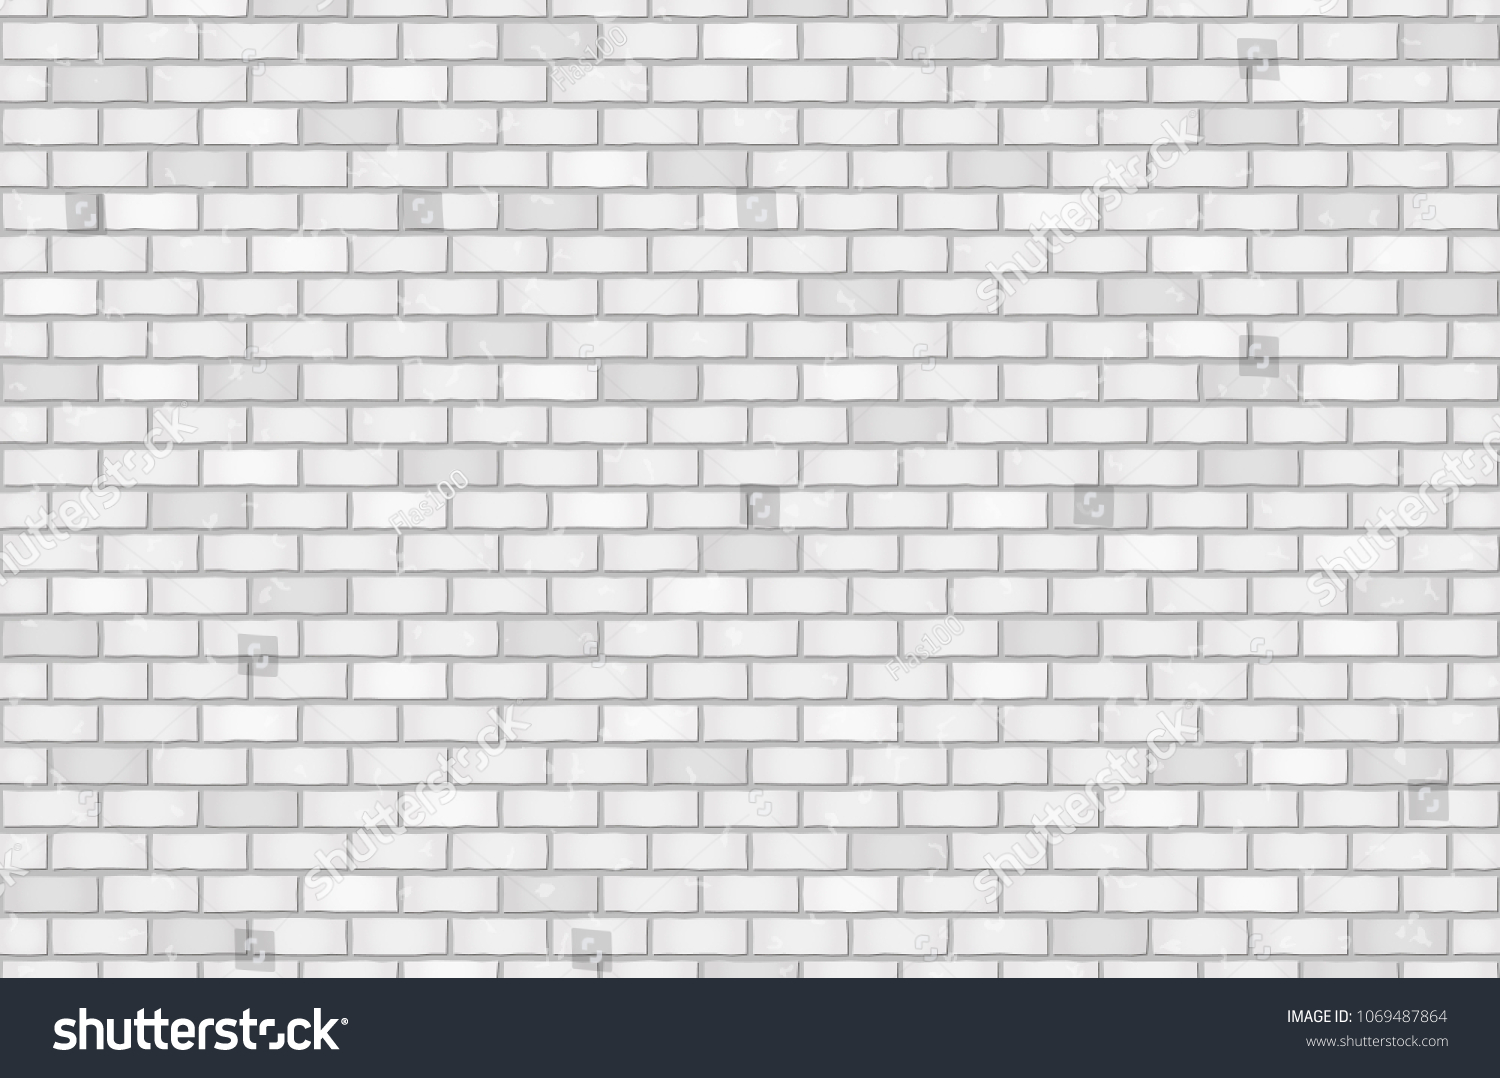 White Gray Brick Wall Texture Background Stock Vector (Royalty Free ...